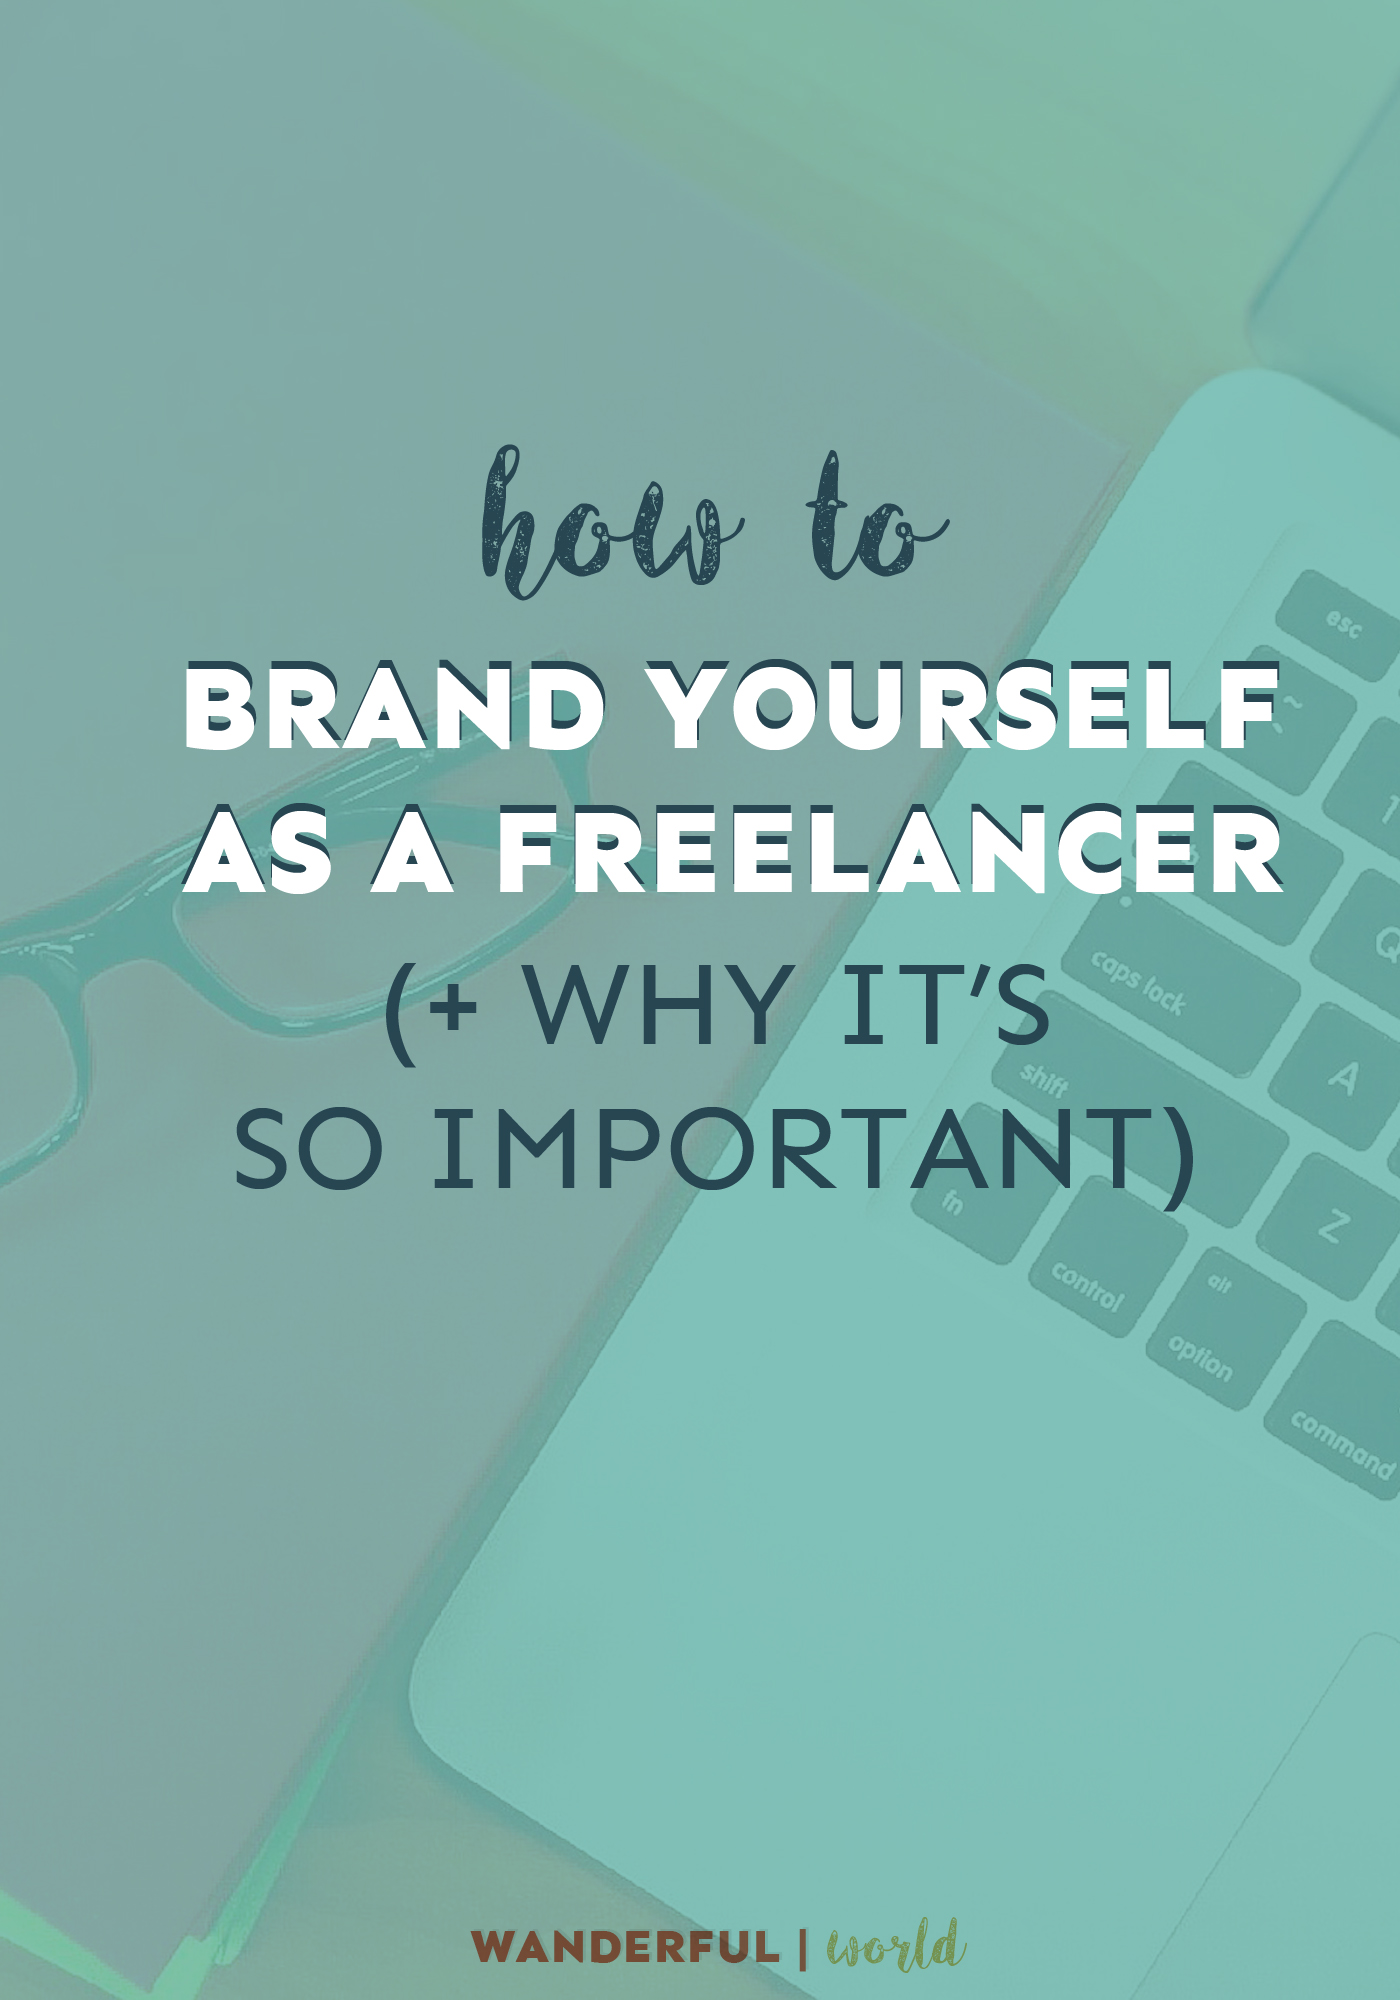 Want to know how to brand yourself as a freelancer? This post covers all the bases you need!